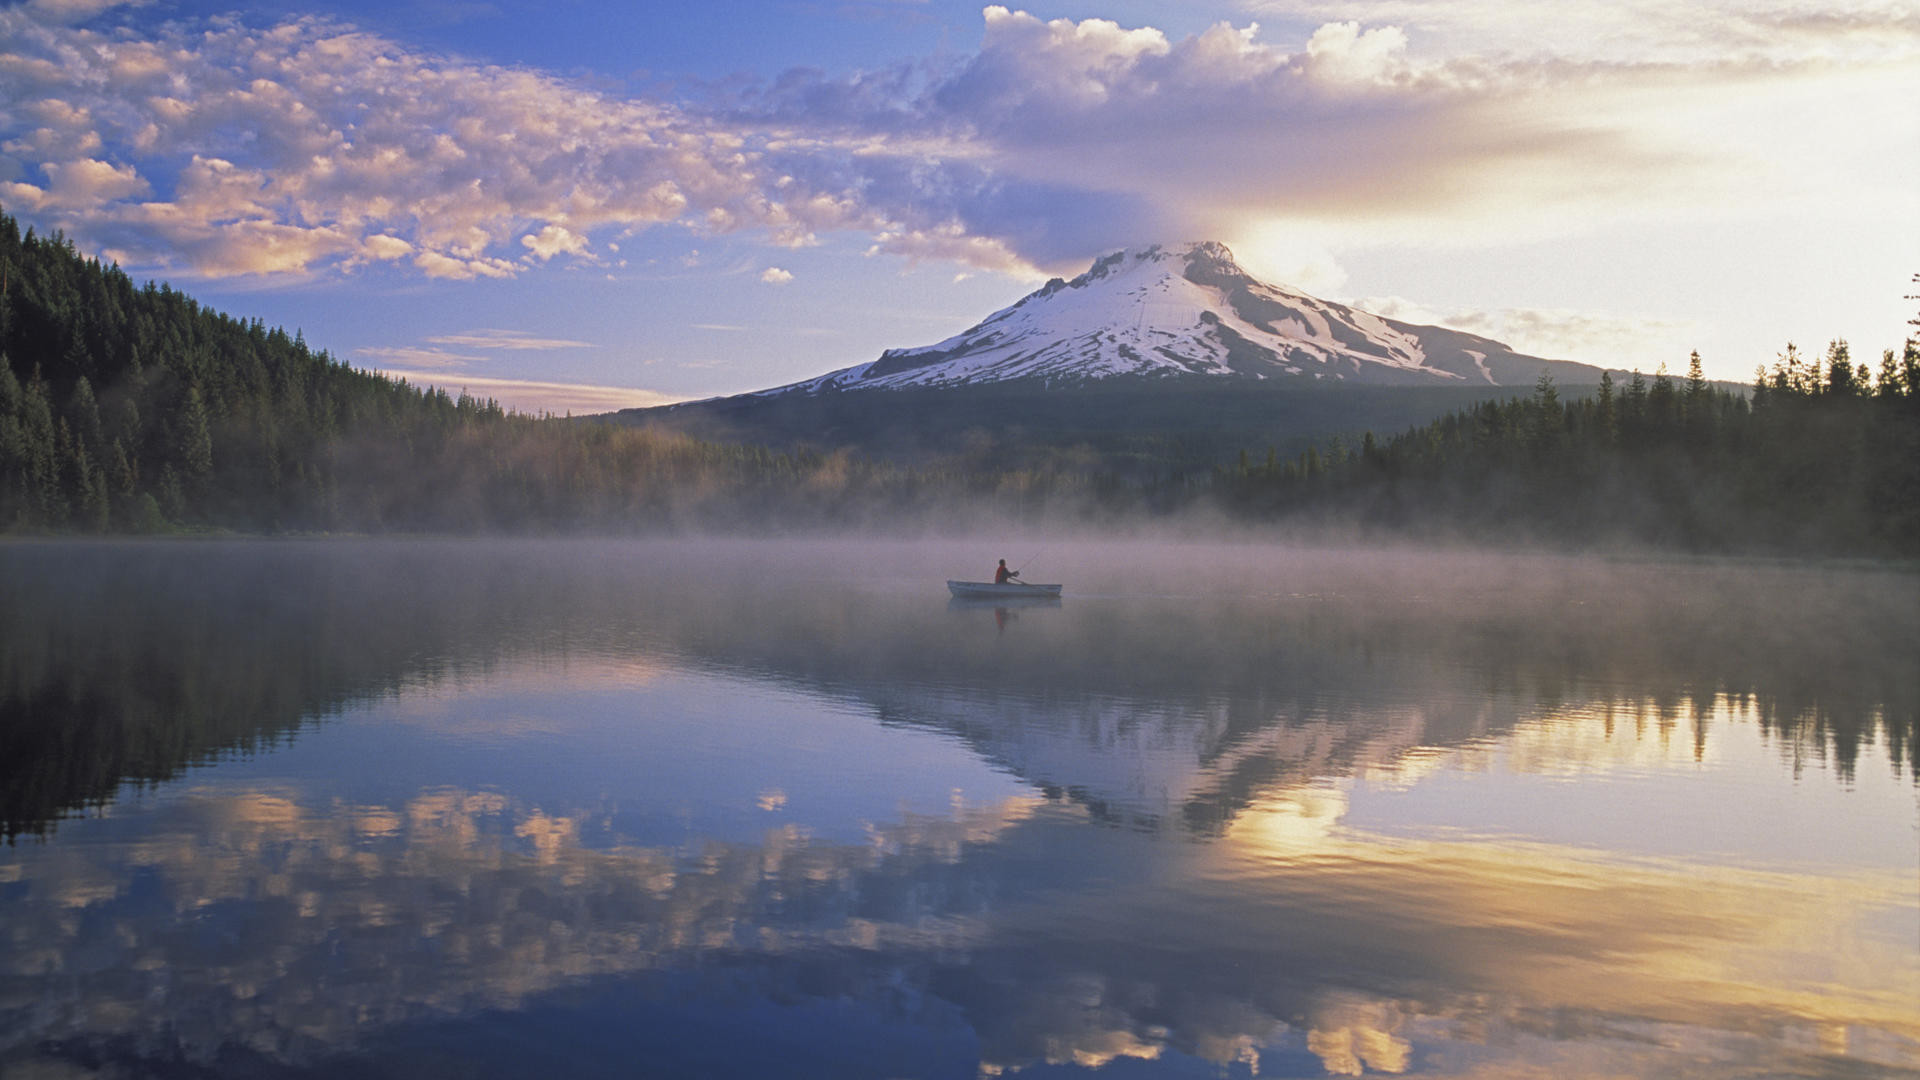 1920x1080 Download Background - Mount Hood and Fisherman on Trillium Lake, Oregon -  Free Cool Backgrounds and Wallpapers for your Desktop Or Laptop.